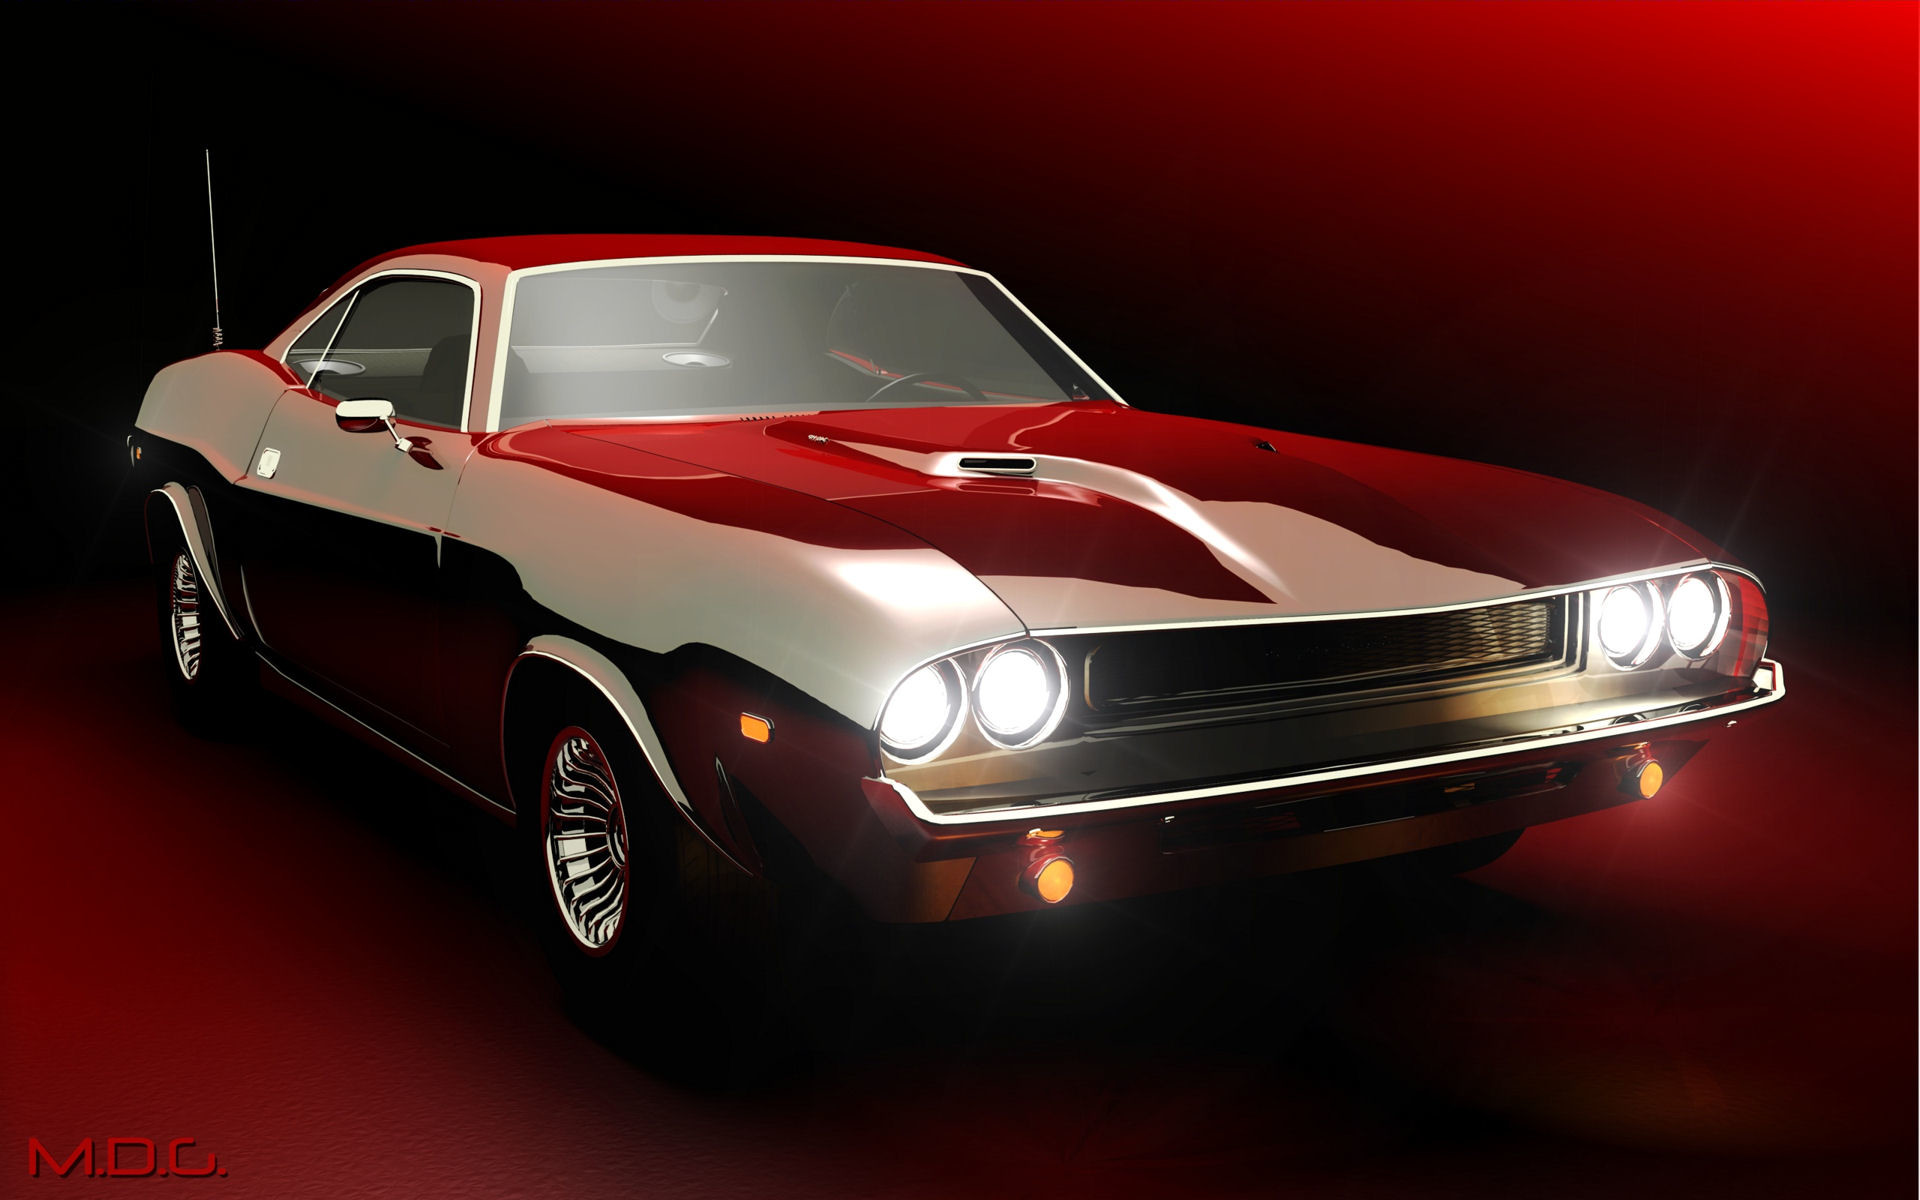 Muscle Car Wallpapers For Desktop 5381 Hd Wallpapers in Cars